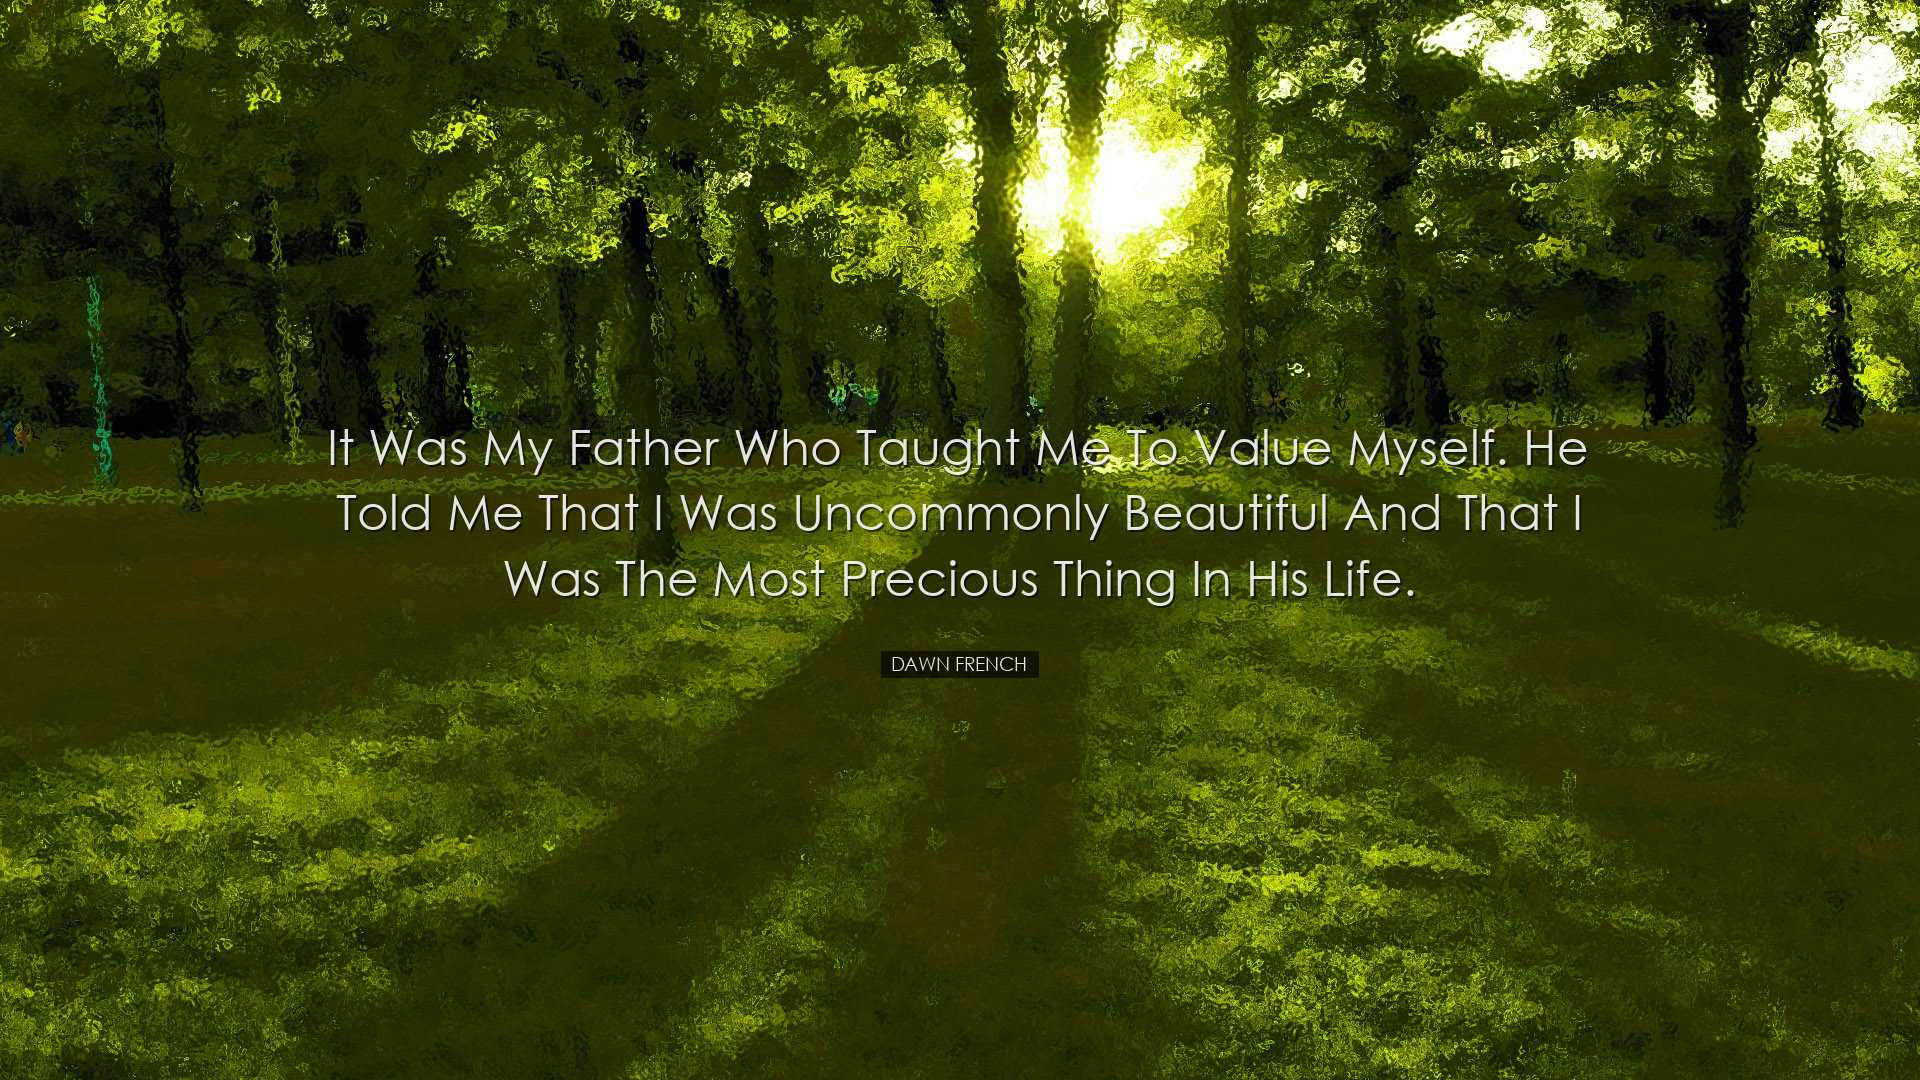 It was my father who taught me to value myself. He told me that I